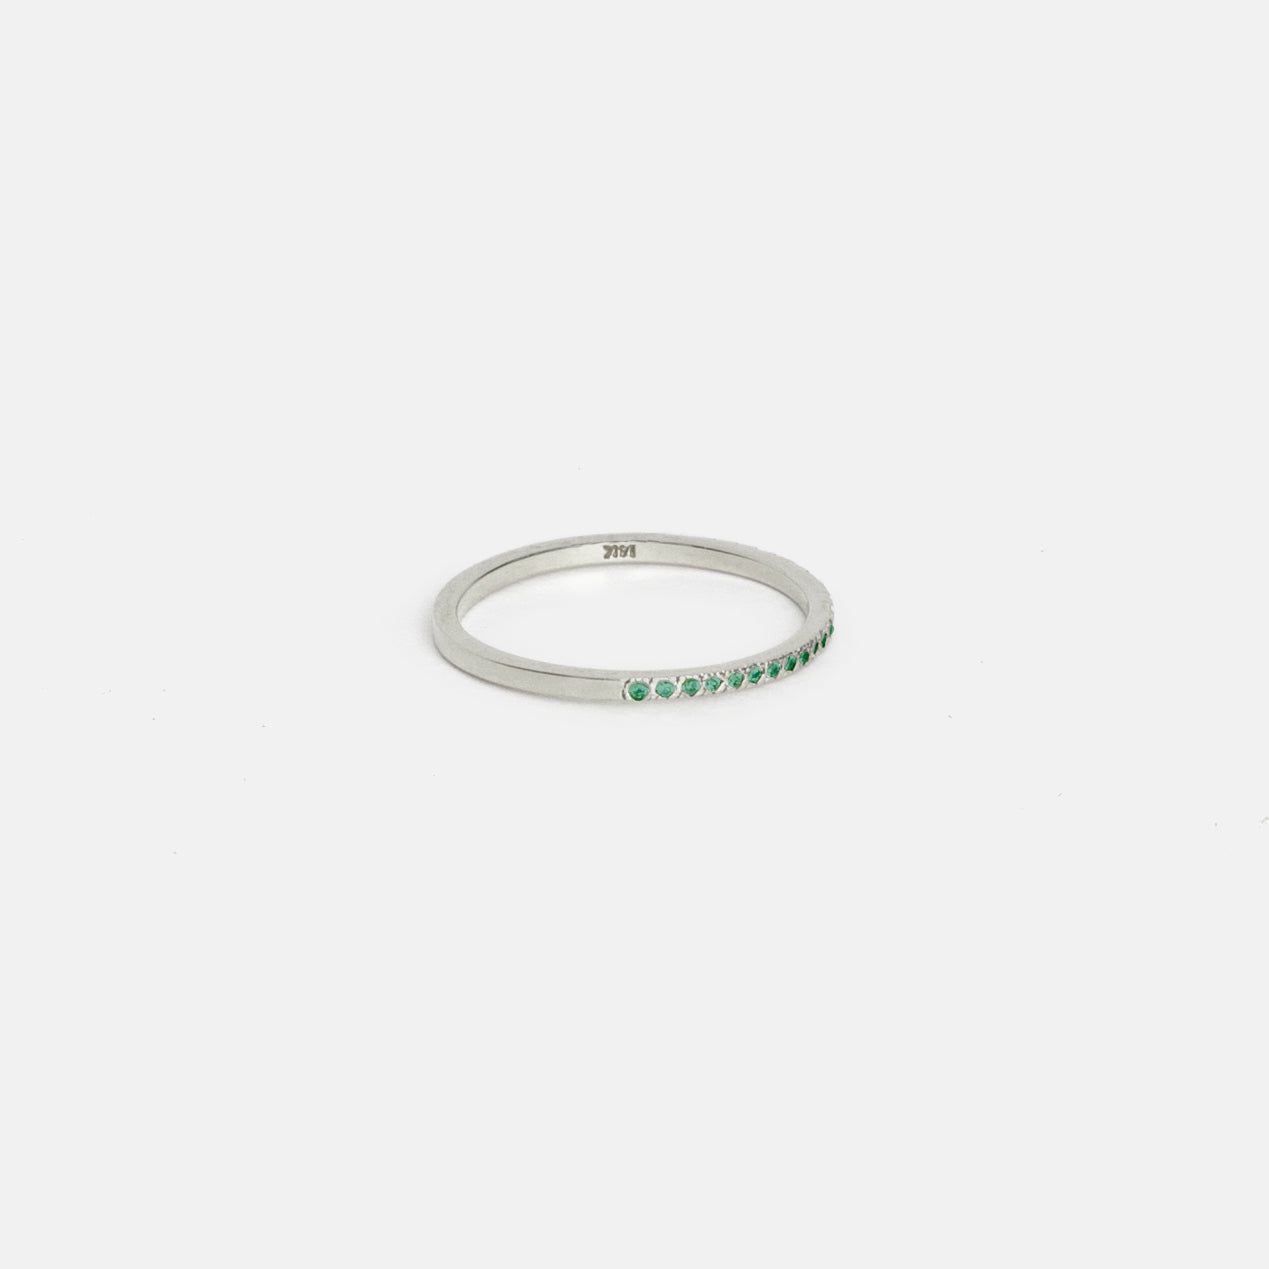 Eile Designer Ring in 14k White Gold set with Emeralds By SHW Fine Jewelry NYC